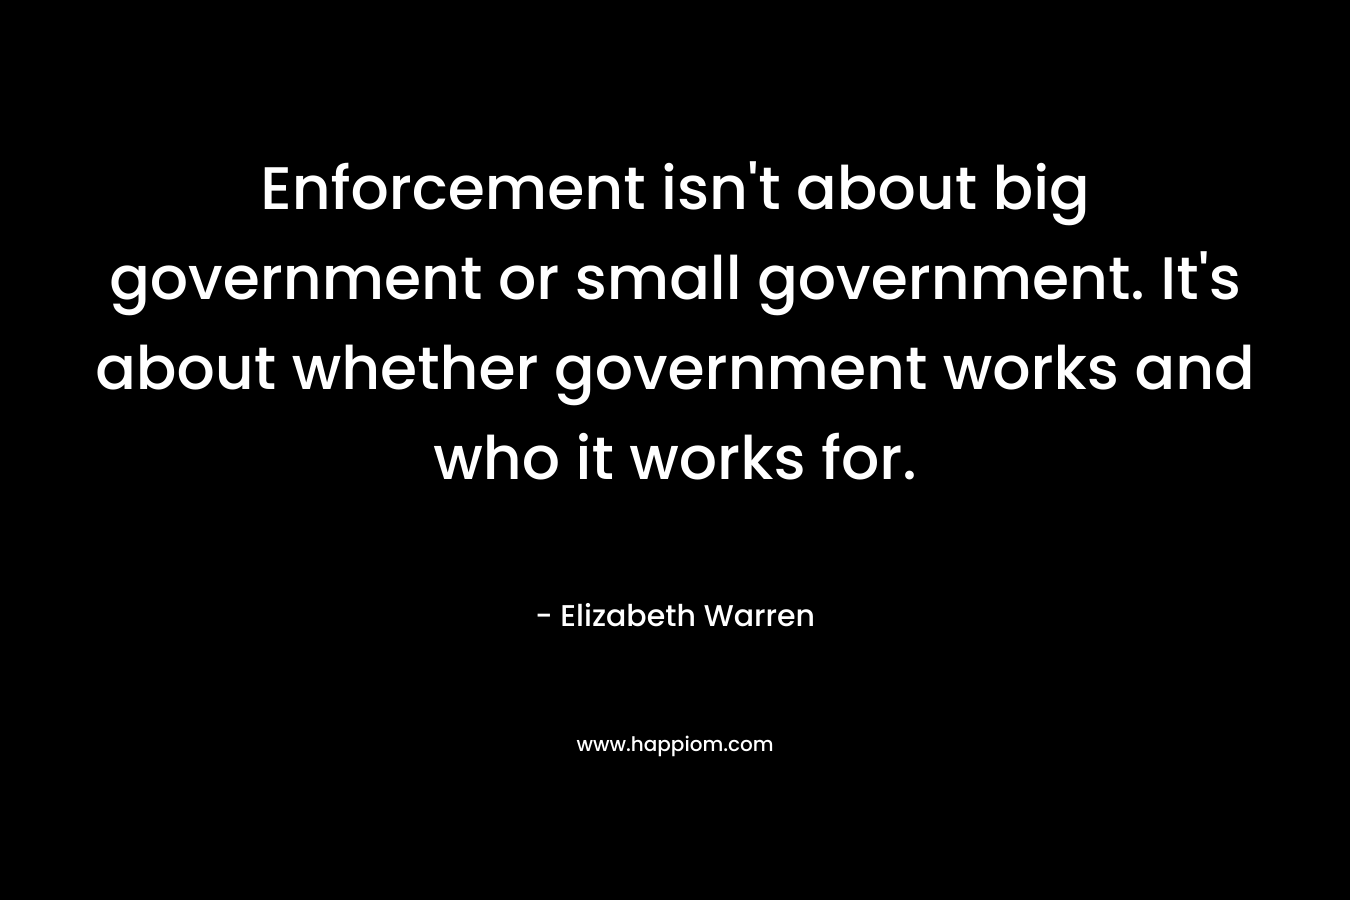 Enforcement isn't about big government or small government. It's about whether government works and who it works for.